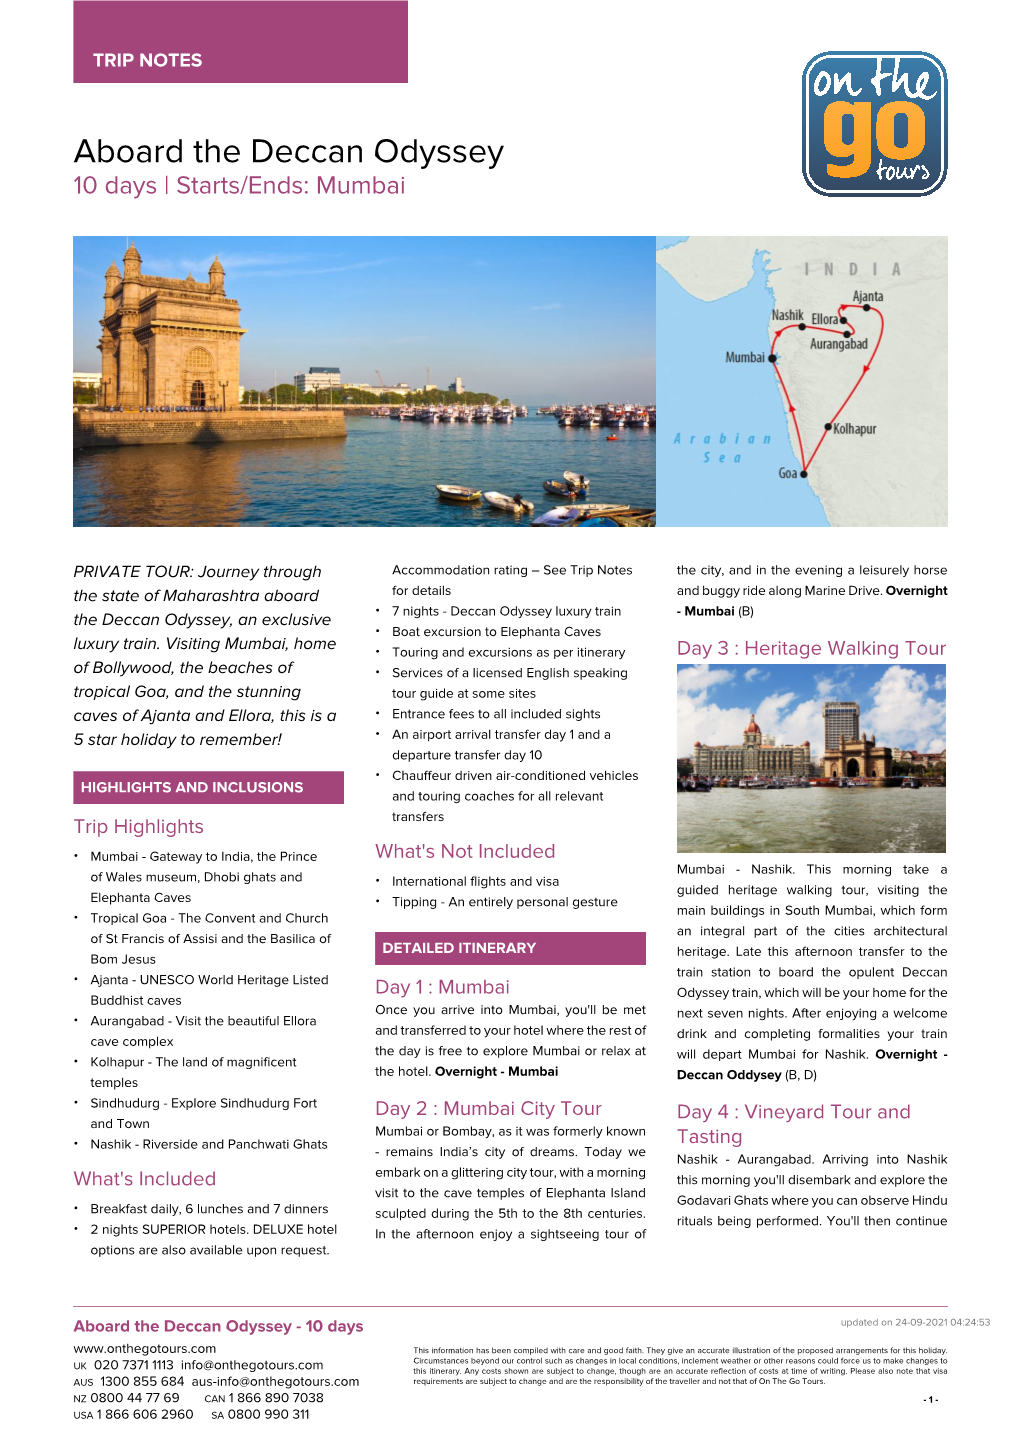 Aboard the Deccan Odyssey 10 Days | Starts/Ends: Mumbai